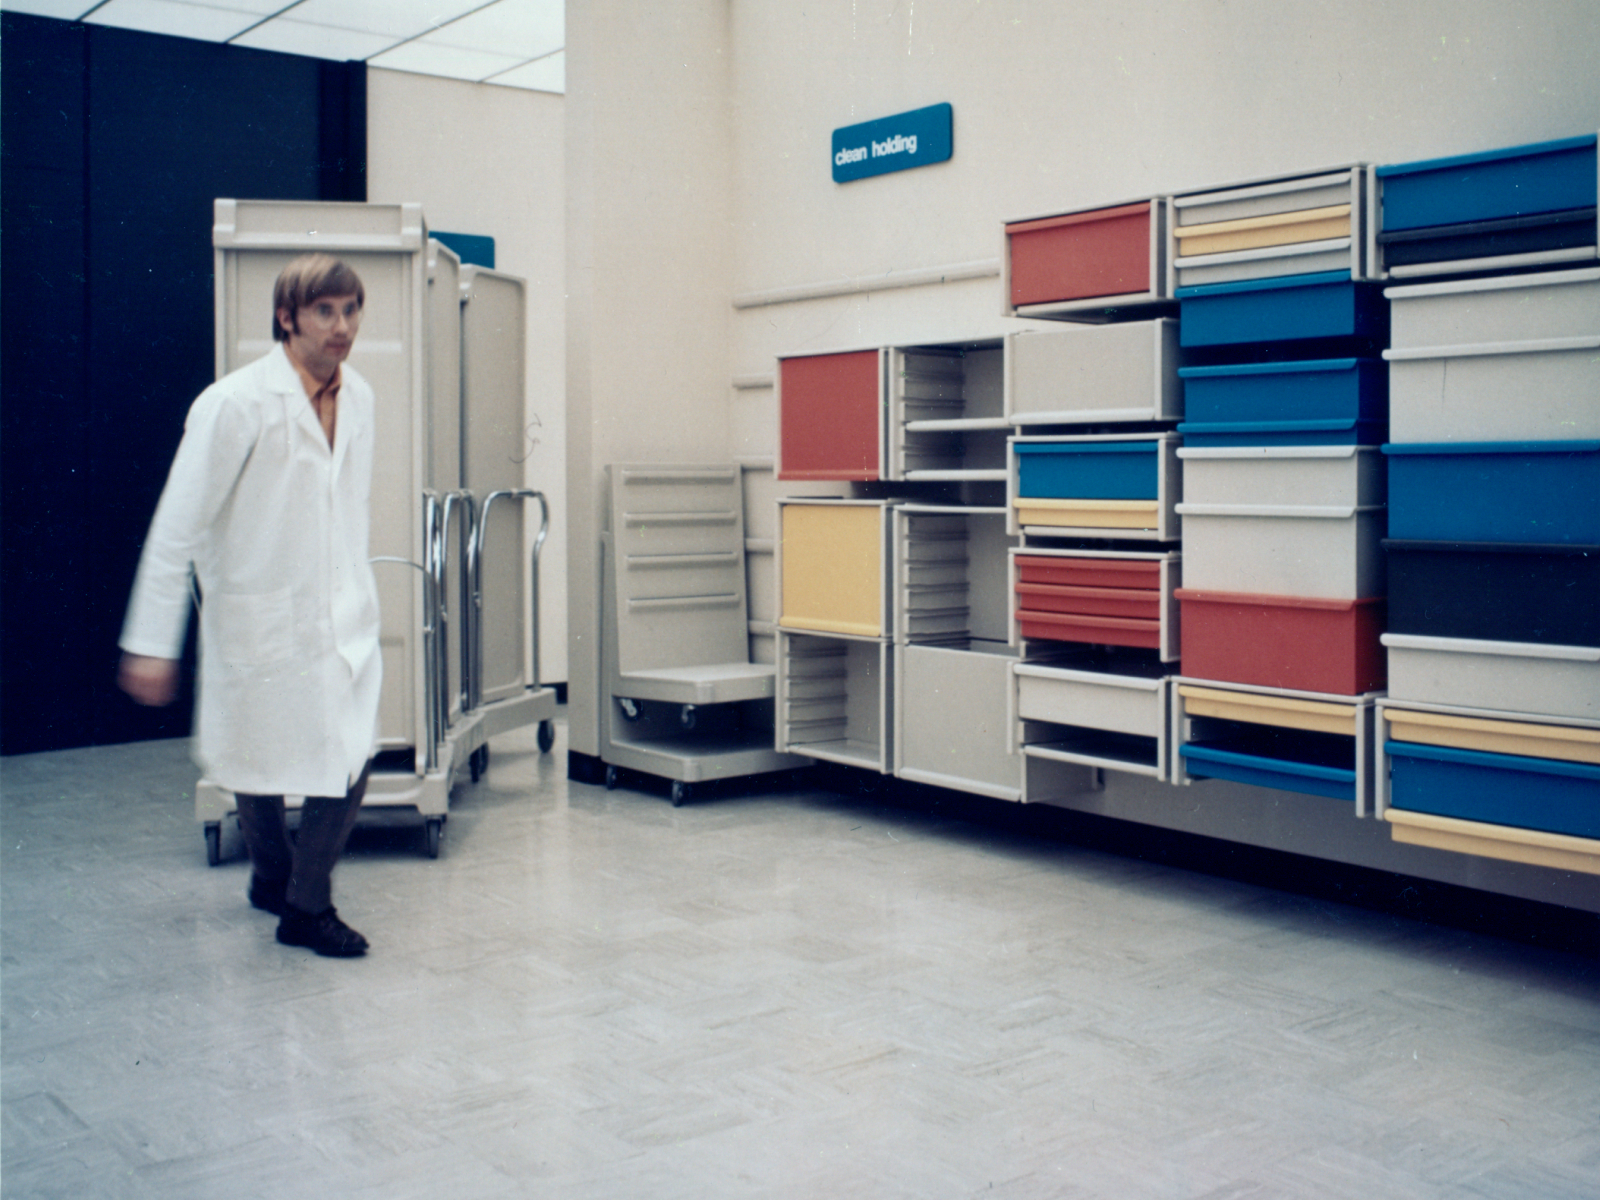 Archival photo of a man in white lab coat pulling Co/Struc lockers on transport cart in motion. Co/Struc wall-mounted open lockers with drawers in red, yellow, blue, and white background. Blue sign on the wall with white lettering that says 'clean holding.'